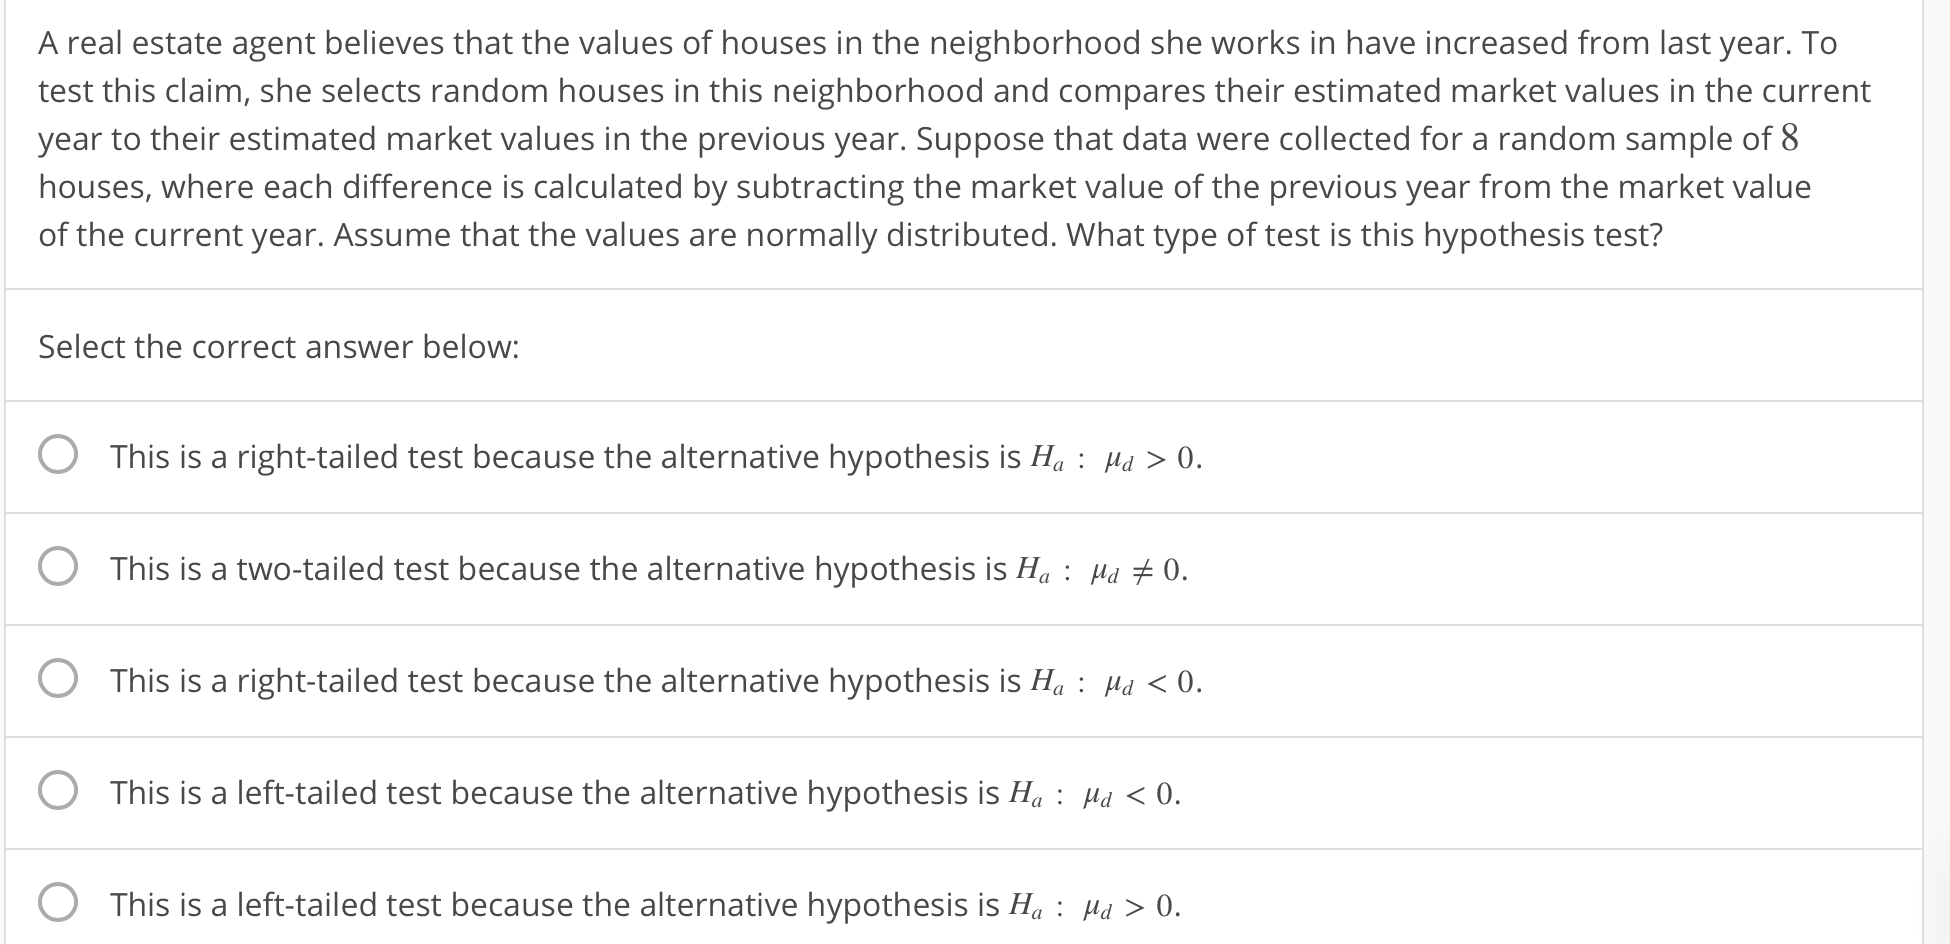 A real estate agent believes that the values of houses in the neighborhood she works in have increased from last year. To
test this claim, she selects random houses in this neighborhood and compares their estimated market values in the current
year to their estimated market values in the previous year. Suppose that data were collected for a random sample of 8
houses, where each difference is calculated by subtracting the market value of the previous year from the market value
of the current year. Assume that the values are normally distributed. What type of test is this hypothesis test?
Select the correct answer below:
O This is a right-tailed test because the alternative hypothesis is H, 0
This is a two-tailed test because the alternative hypothesis is Ha: Ha 0
O This is a right-tailed test because the alternative hypothesis is H: Mu 0.
0 .
0
This is a left-tailed test because the alternative hypothesis is Ha:
Hd 0
This is a left-tailed test because the alternative hypothesis is Ha:
Hd0
.
